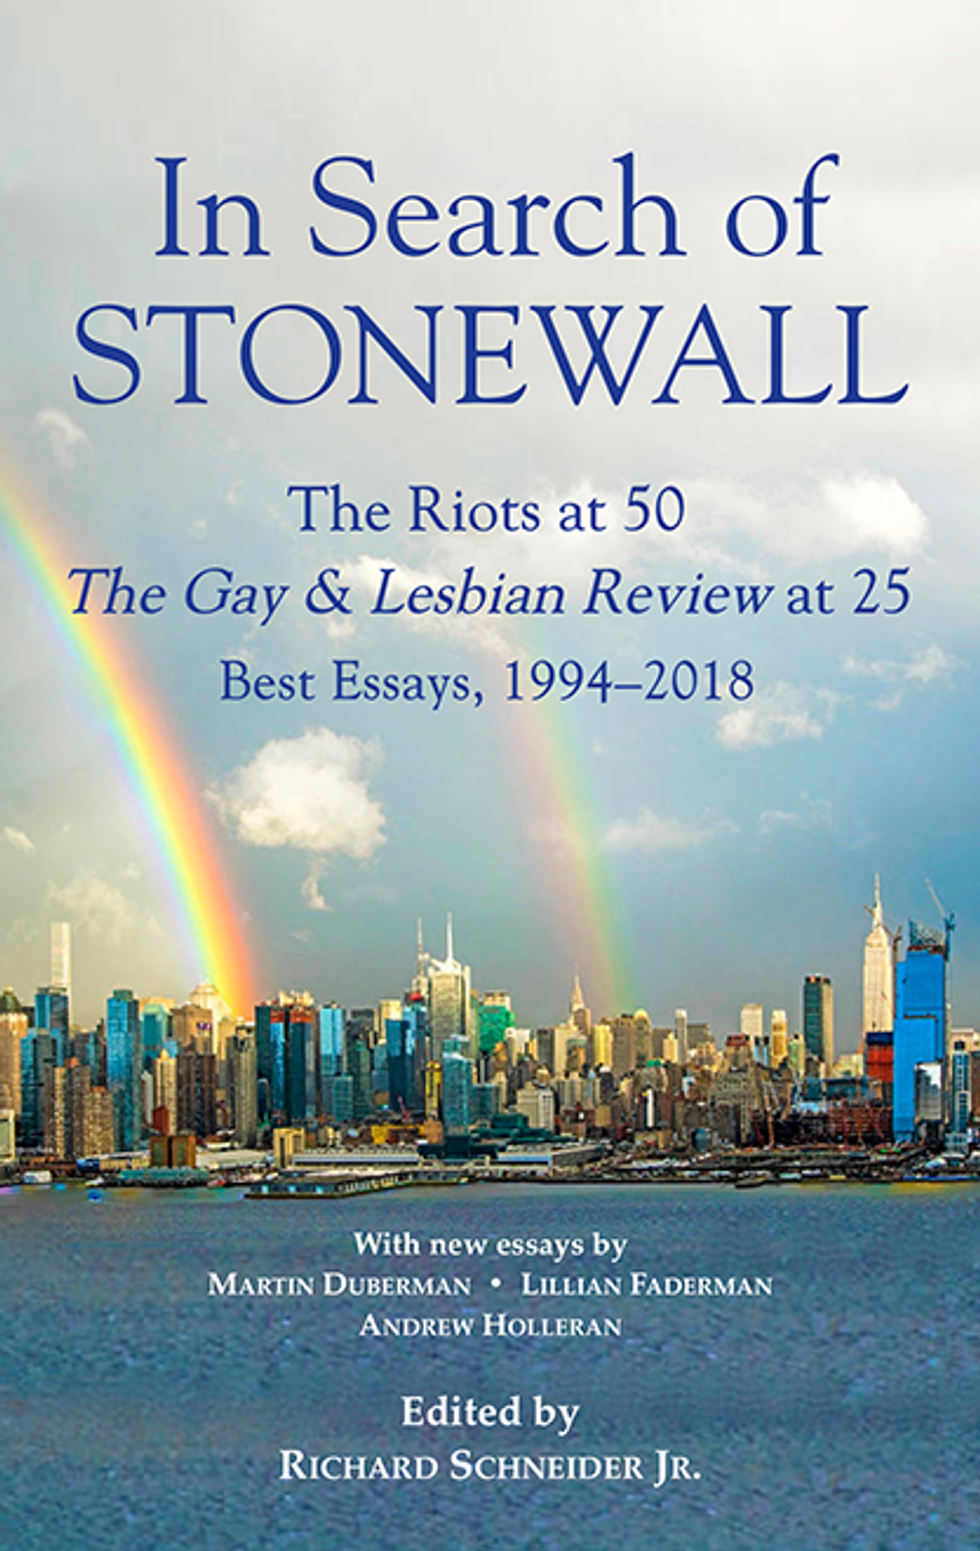 in_search_of_stonewall.png